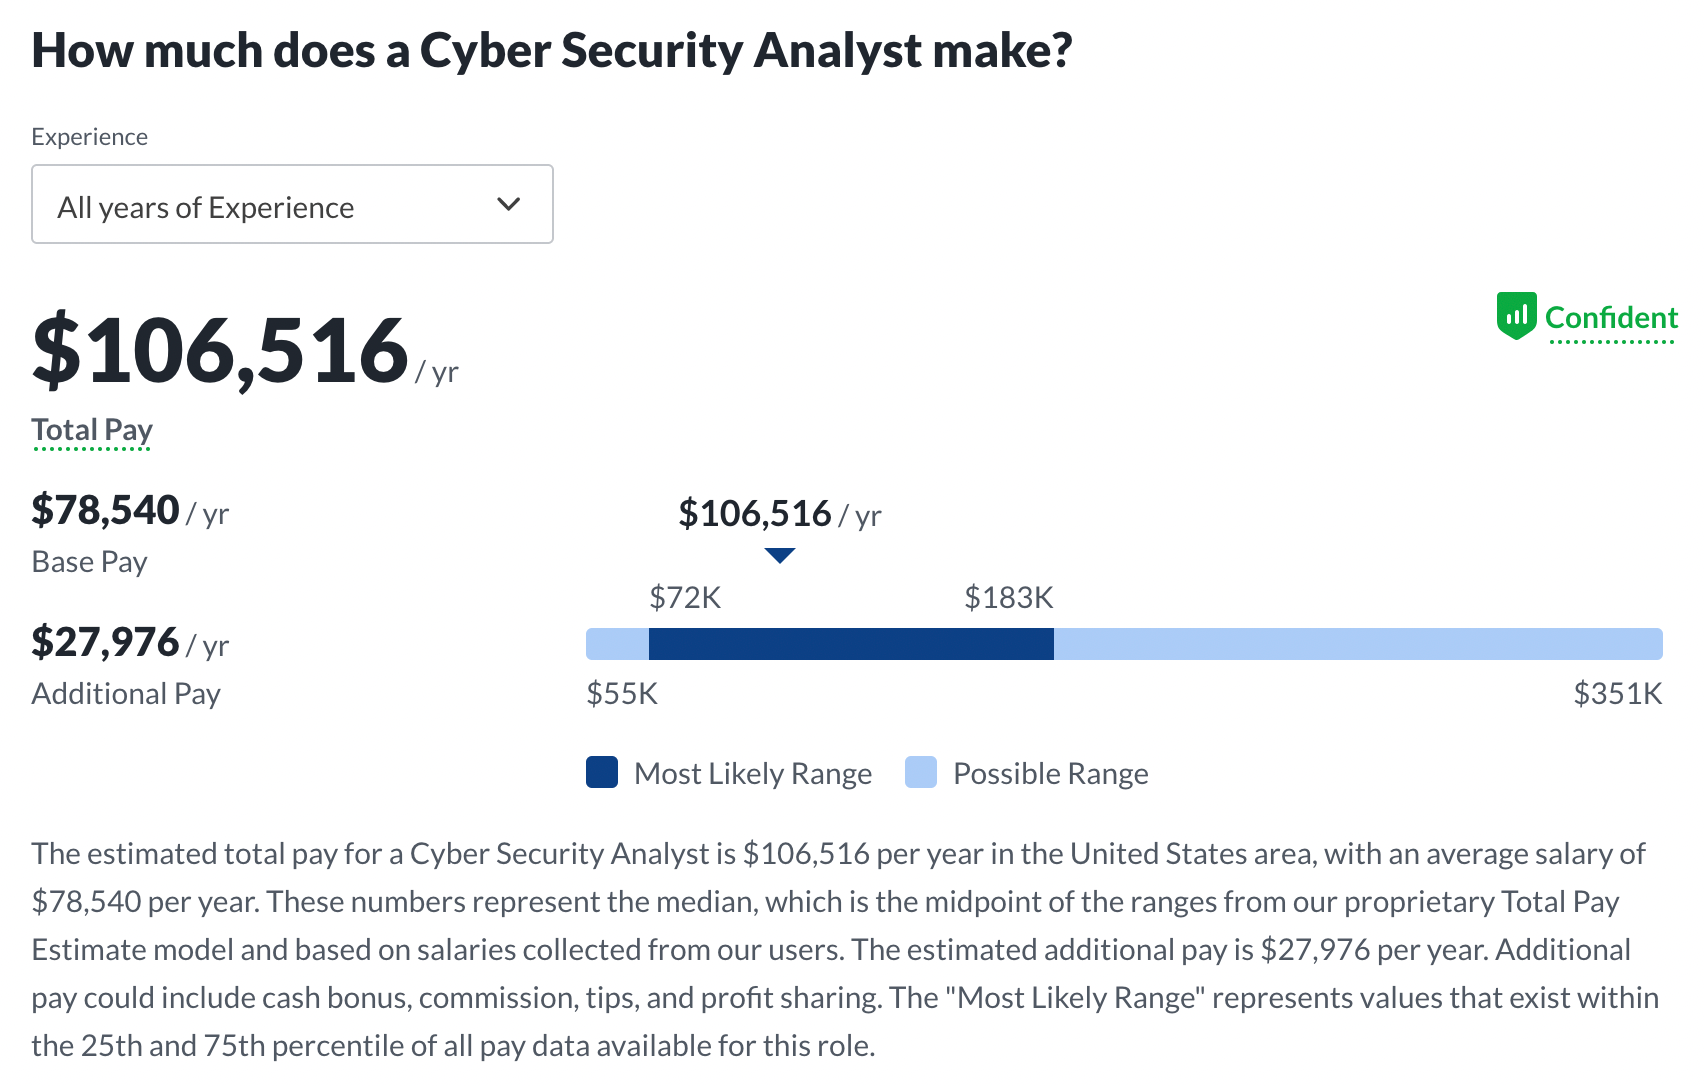 3 Reasons Why "Cyber Security Analyst" is the Best Job in 2022!